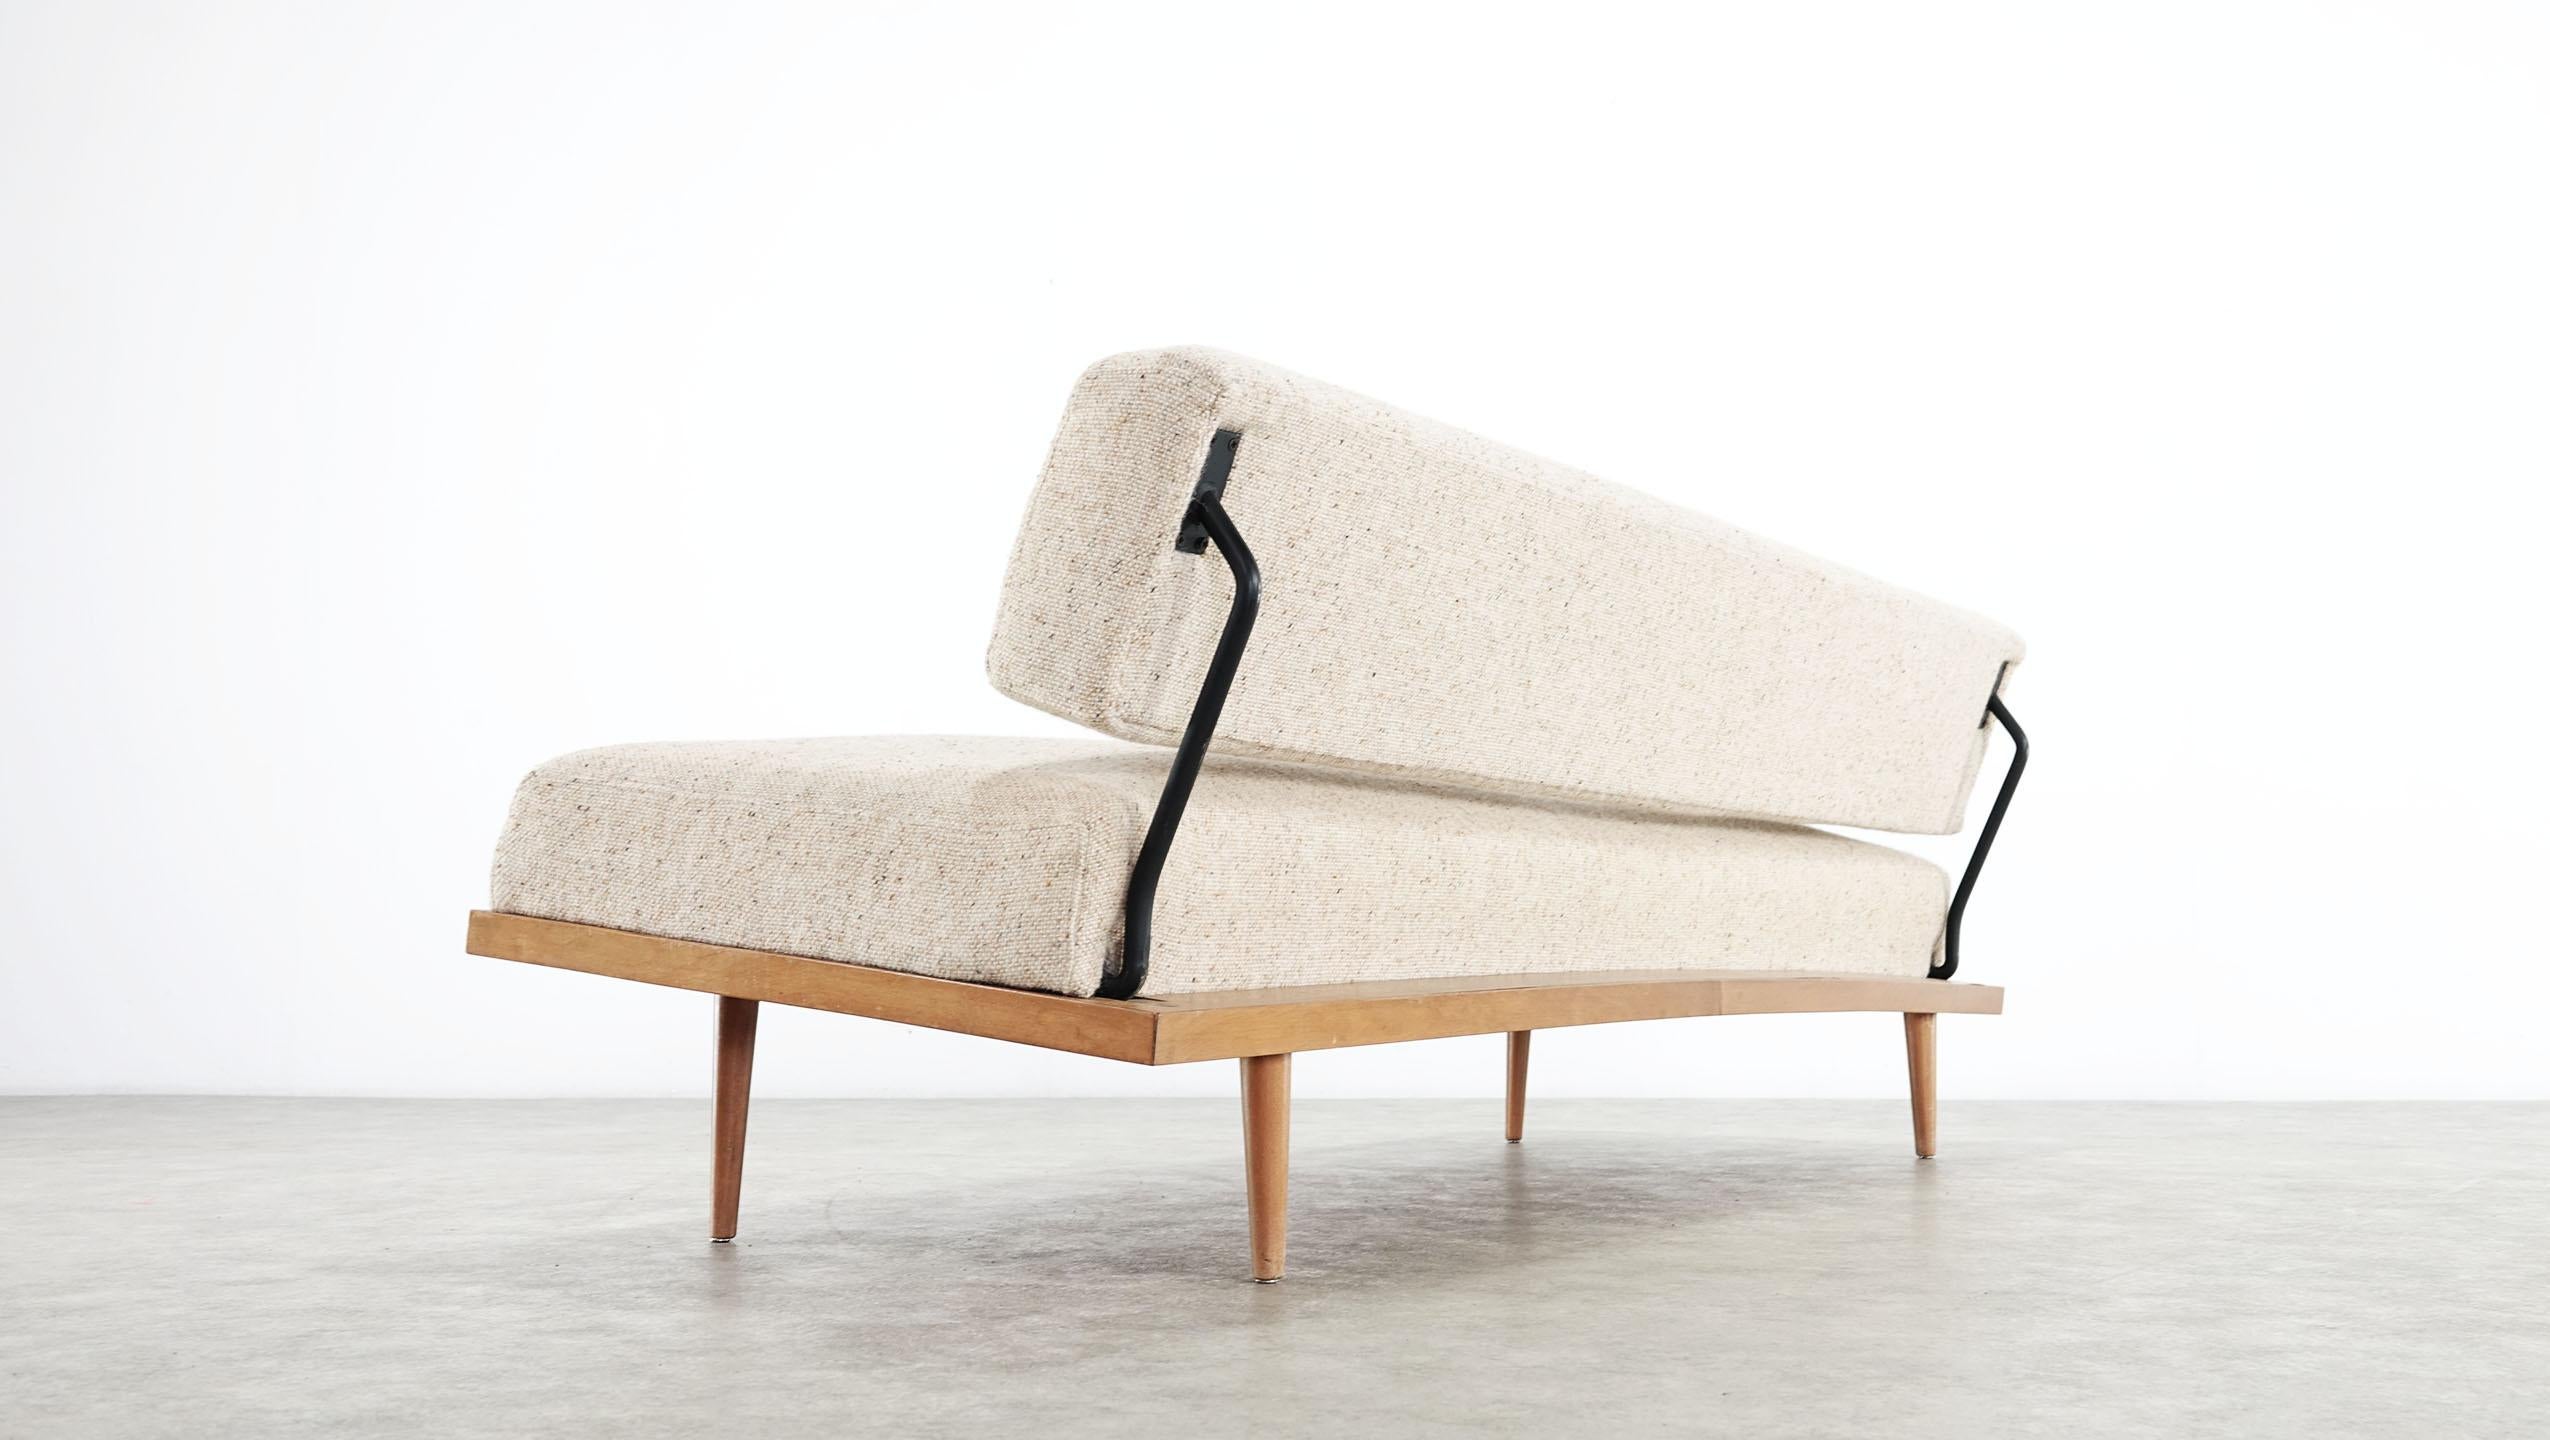 Nice Minimalist daybed designed by Josef Pentenrieder in 1954 and edited by Hans Kaufeld. Germany, circa 1950. Birch wood frame, feet and back in black lacquered tubular steel. This daybed sofa have been fully restored and newly upholstered with a